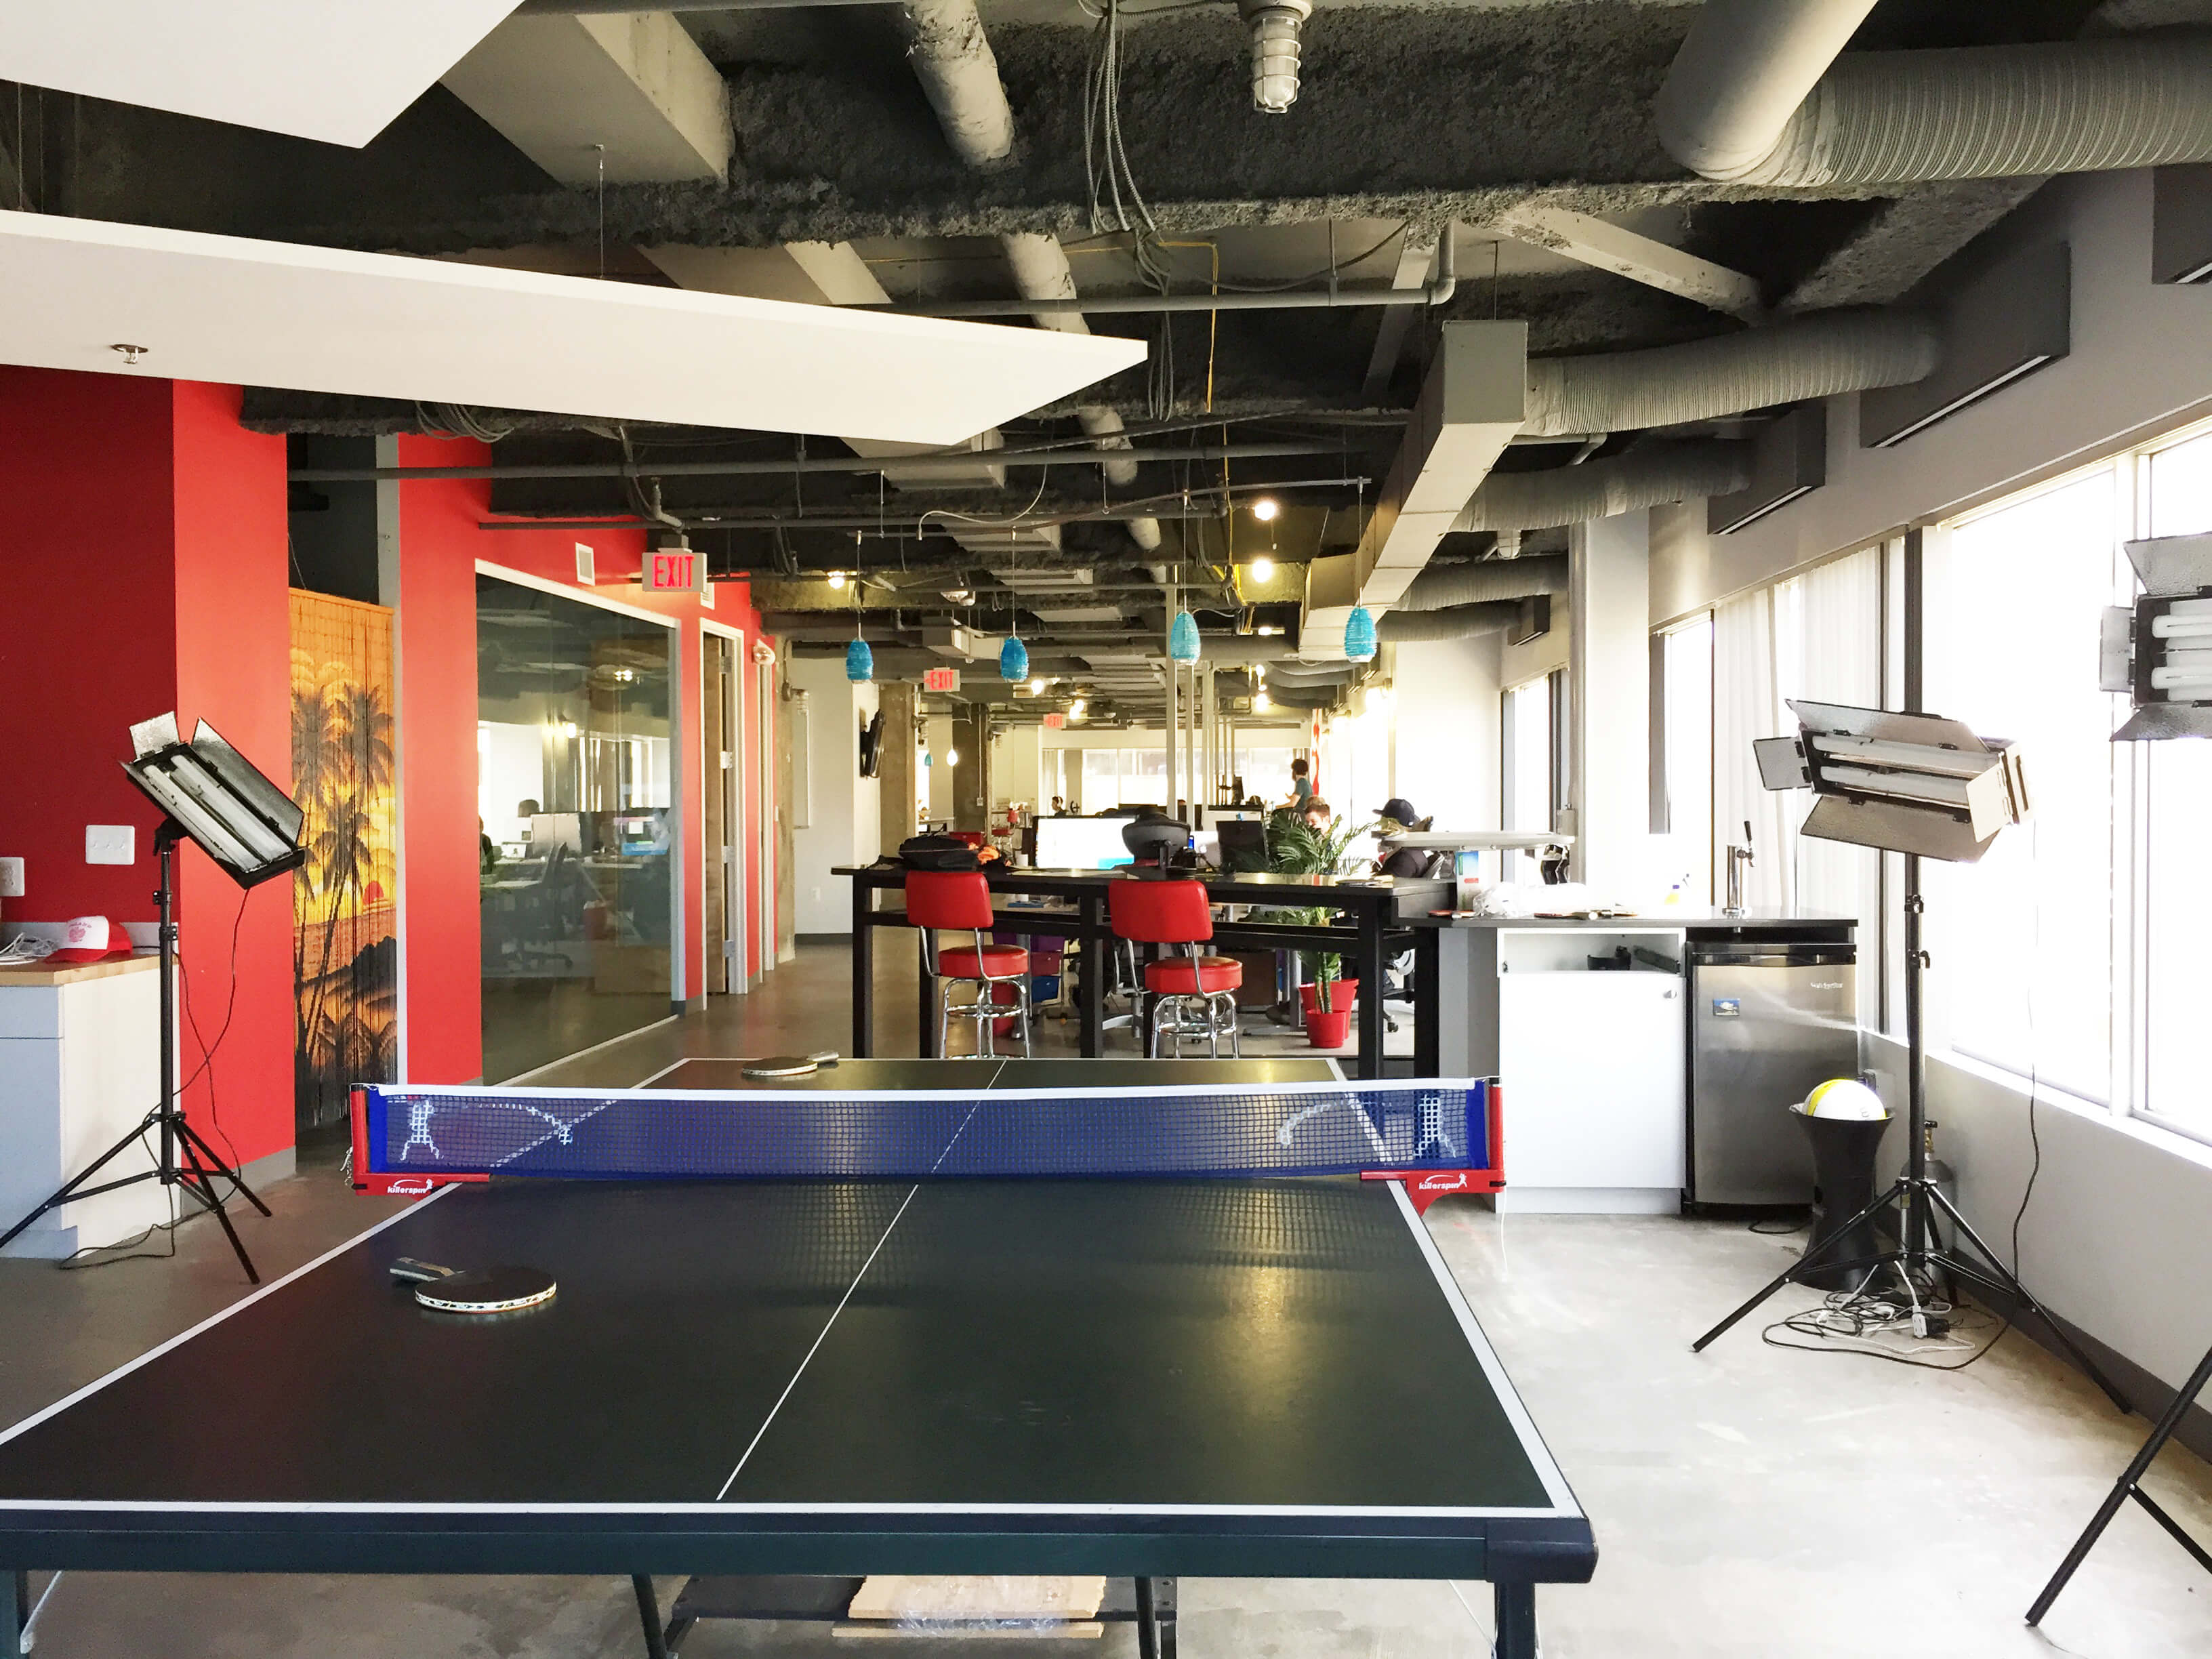 Tag for "office space with ping pong table" | Office Spaces